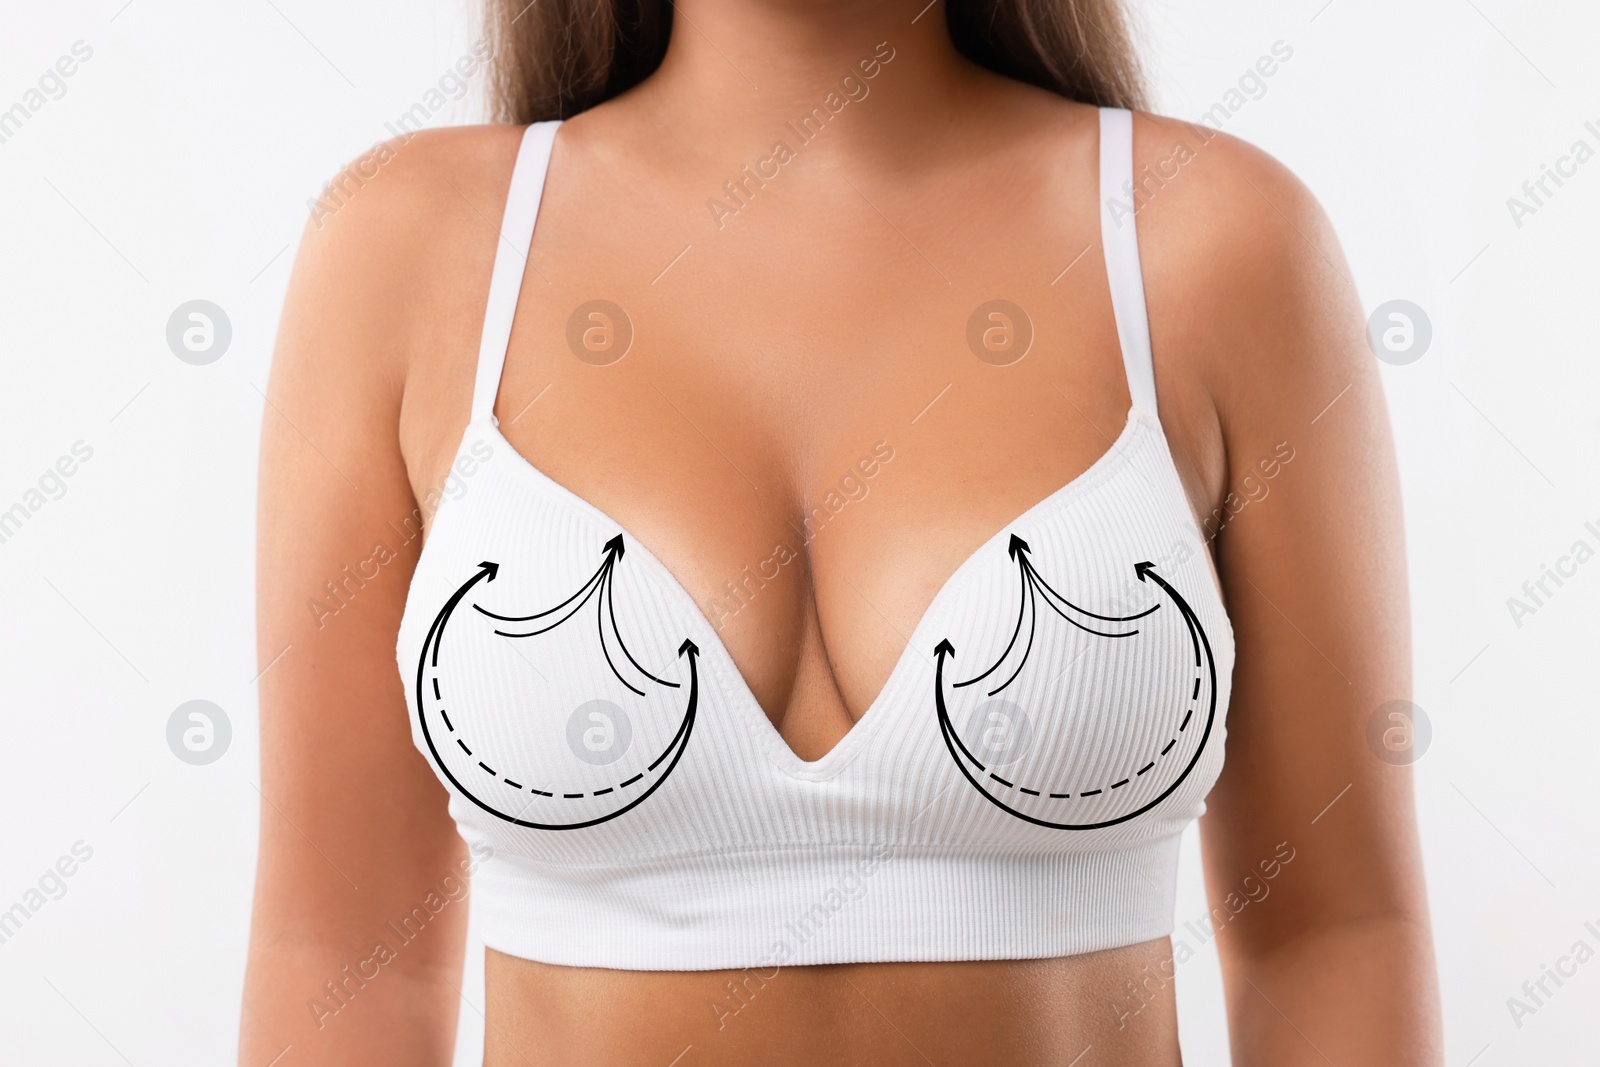 Image of Breast surgery. Woman with markings on bra against white background, closeup